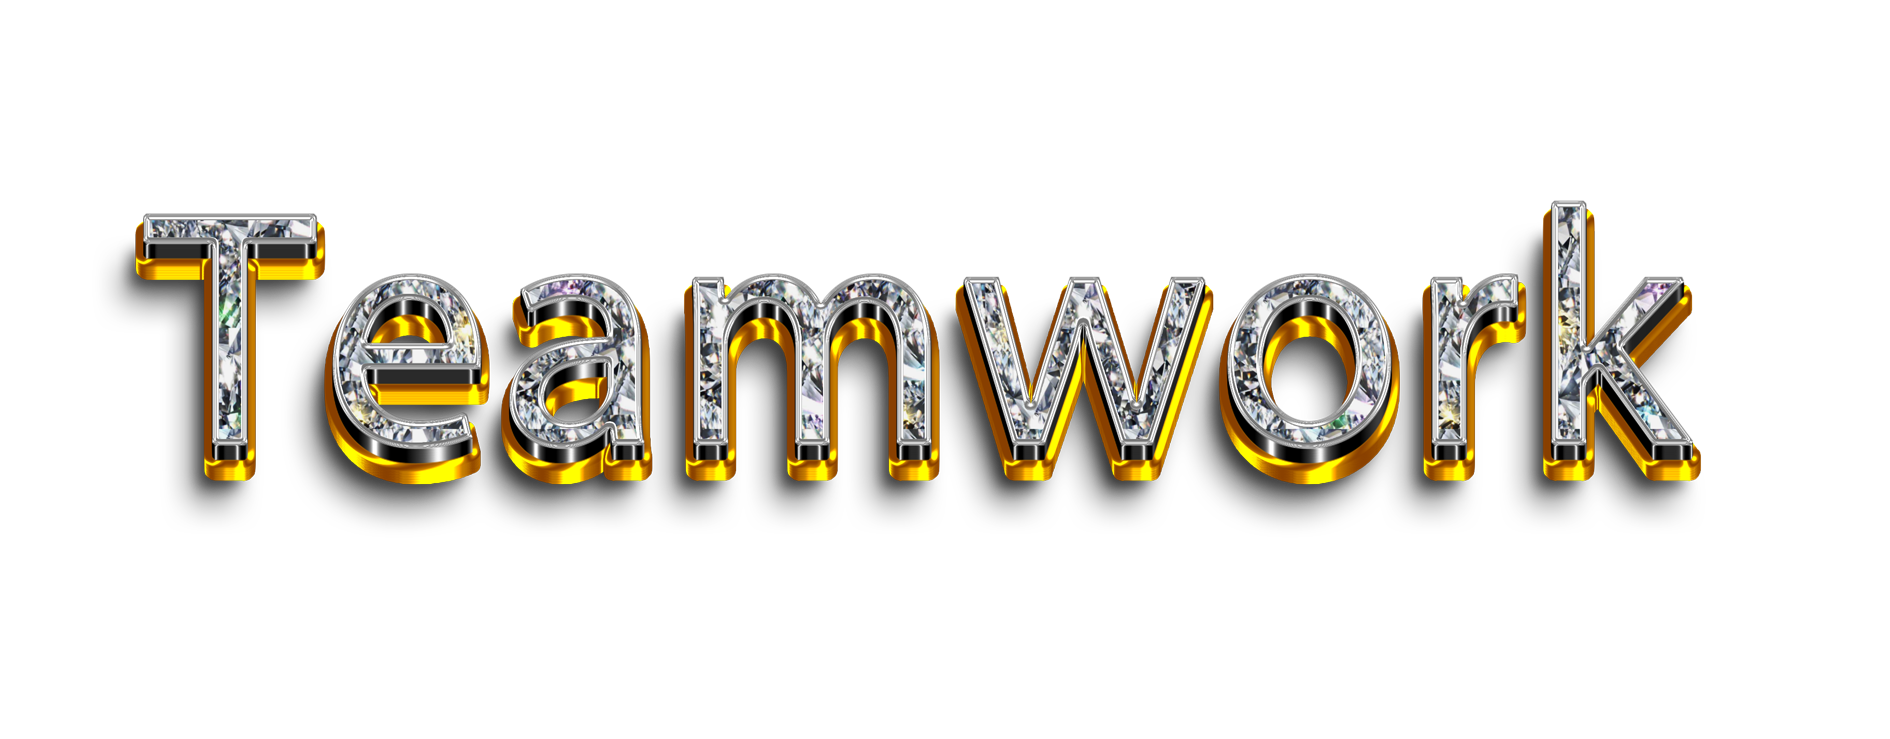 Teamwork png, word Teamwork png, Teamwork word png, Teamwork text png, Teamwork letters png, Teamwork word diamond gold text typography PNG images transparent background